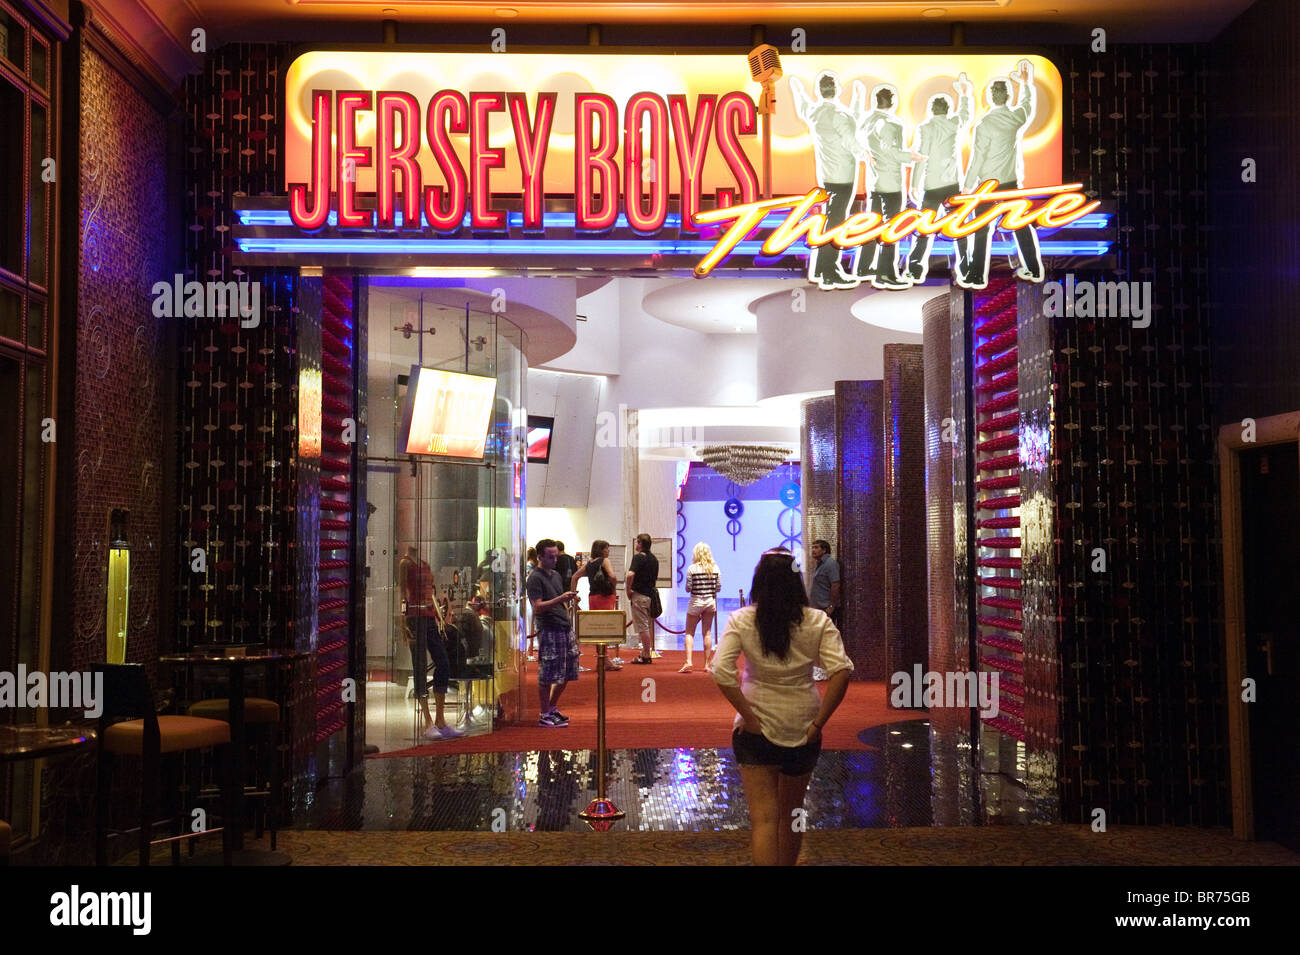 The entrance to the Palazzo Hotel theatre showing 'Jersey Boys'; Las Vegas USA Stock Photo